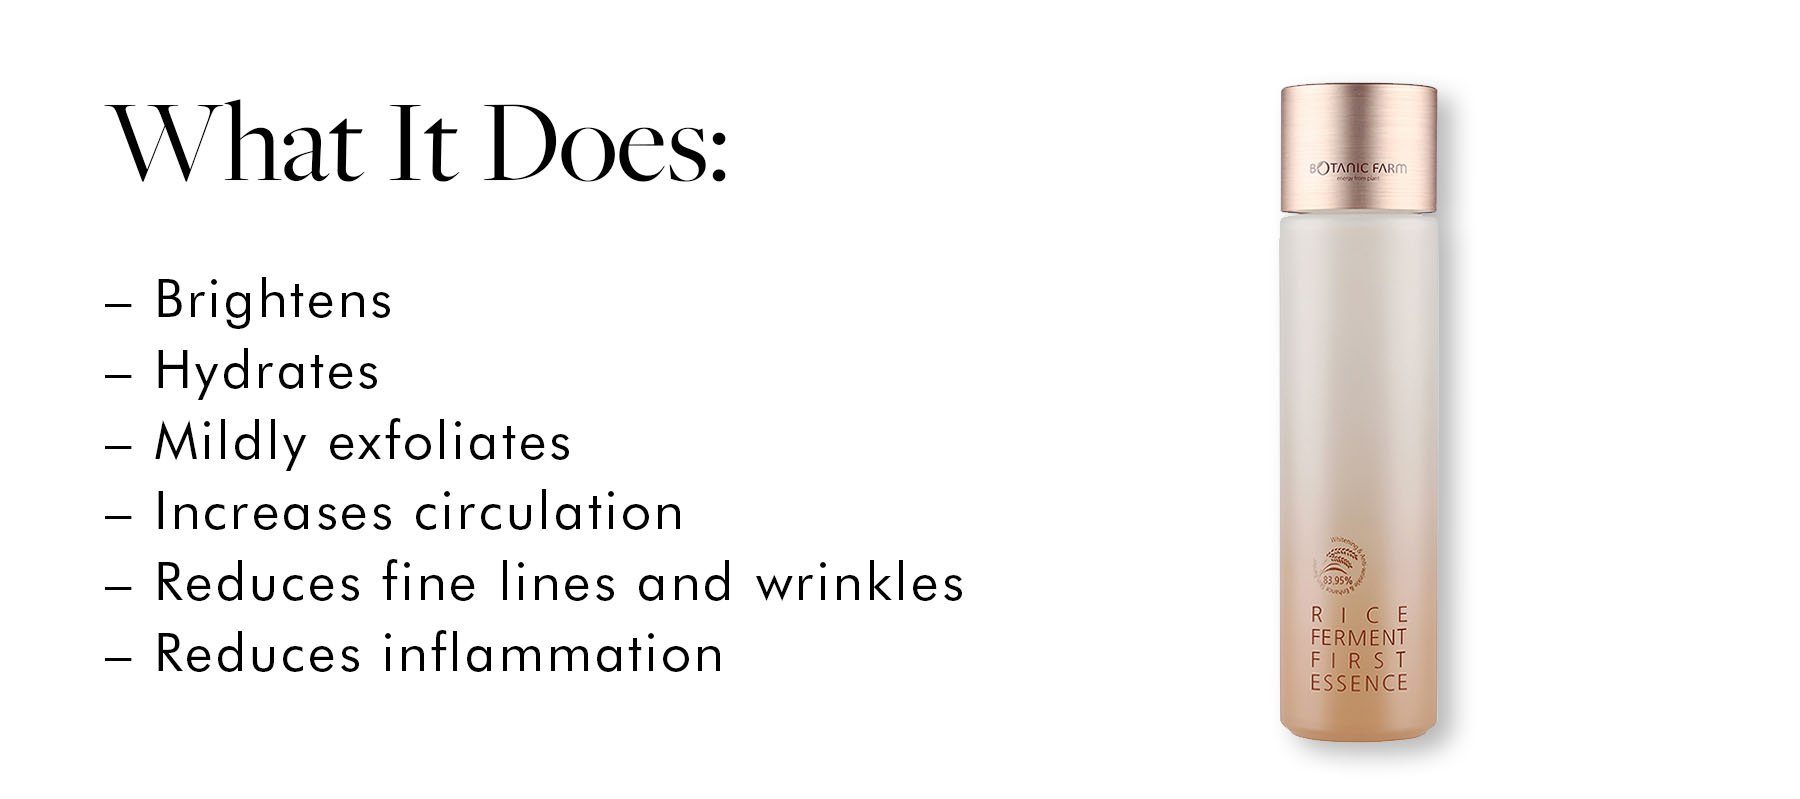 What it does: brightens, hydrates, exfoliates, increases circulation, reduces fine lines, wrinkles and inflammation